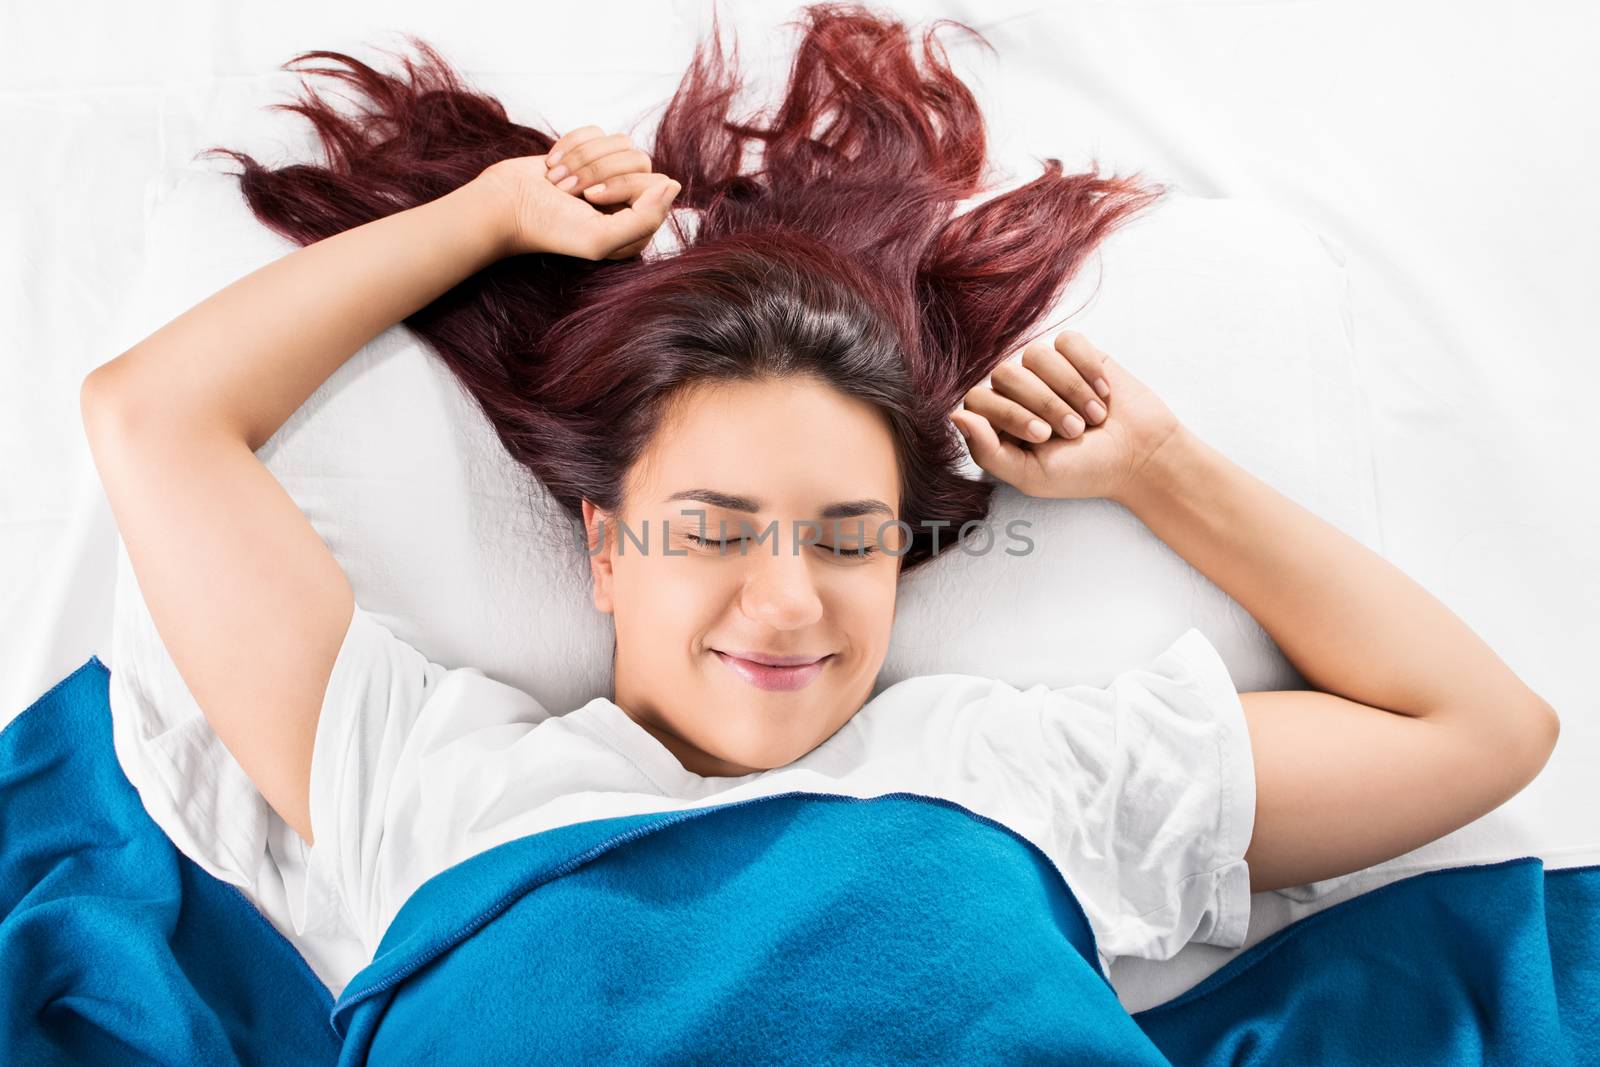 Close up of a beautiful smiling young girl waking up fresh and stretching in bed, isolated on white background.